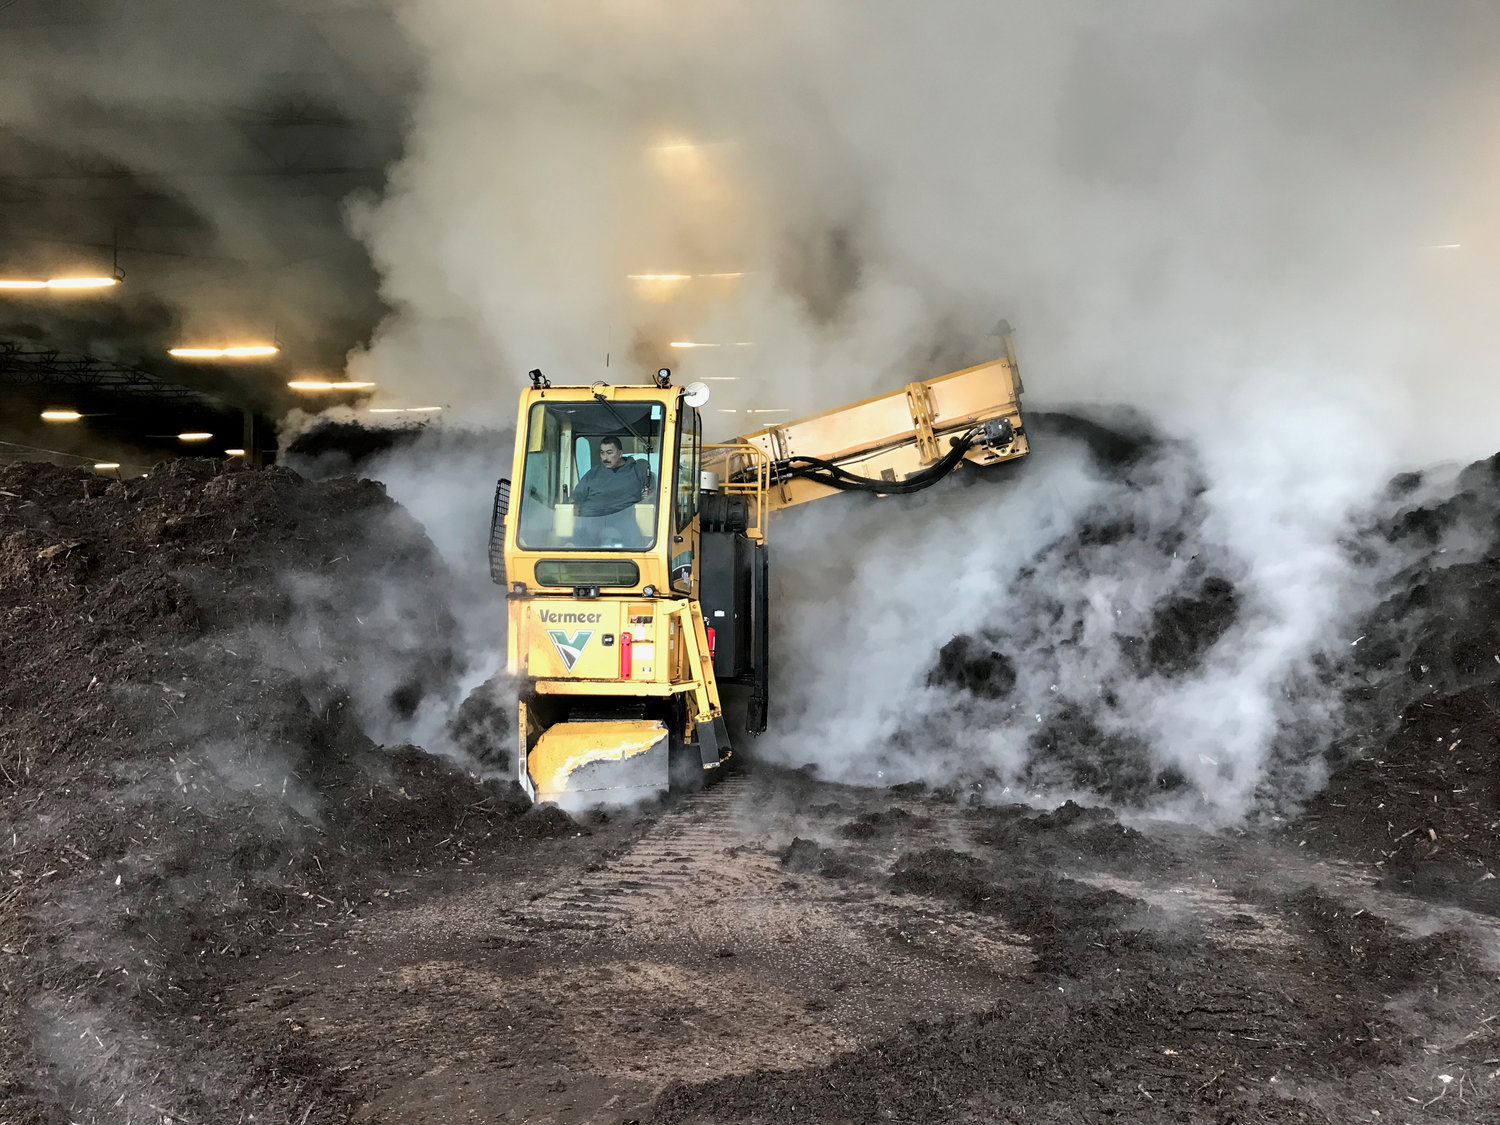 At Silver Springs Organics in Rainier, Armondo Lugo drives a machine that turns over giant steaming piles of compost. The Lacey City Council discussed adopting an ordinance on considering compost products in planning government-funded projects or soliciting and reviewing bids for such projects during its worksession on January 26, 2023.